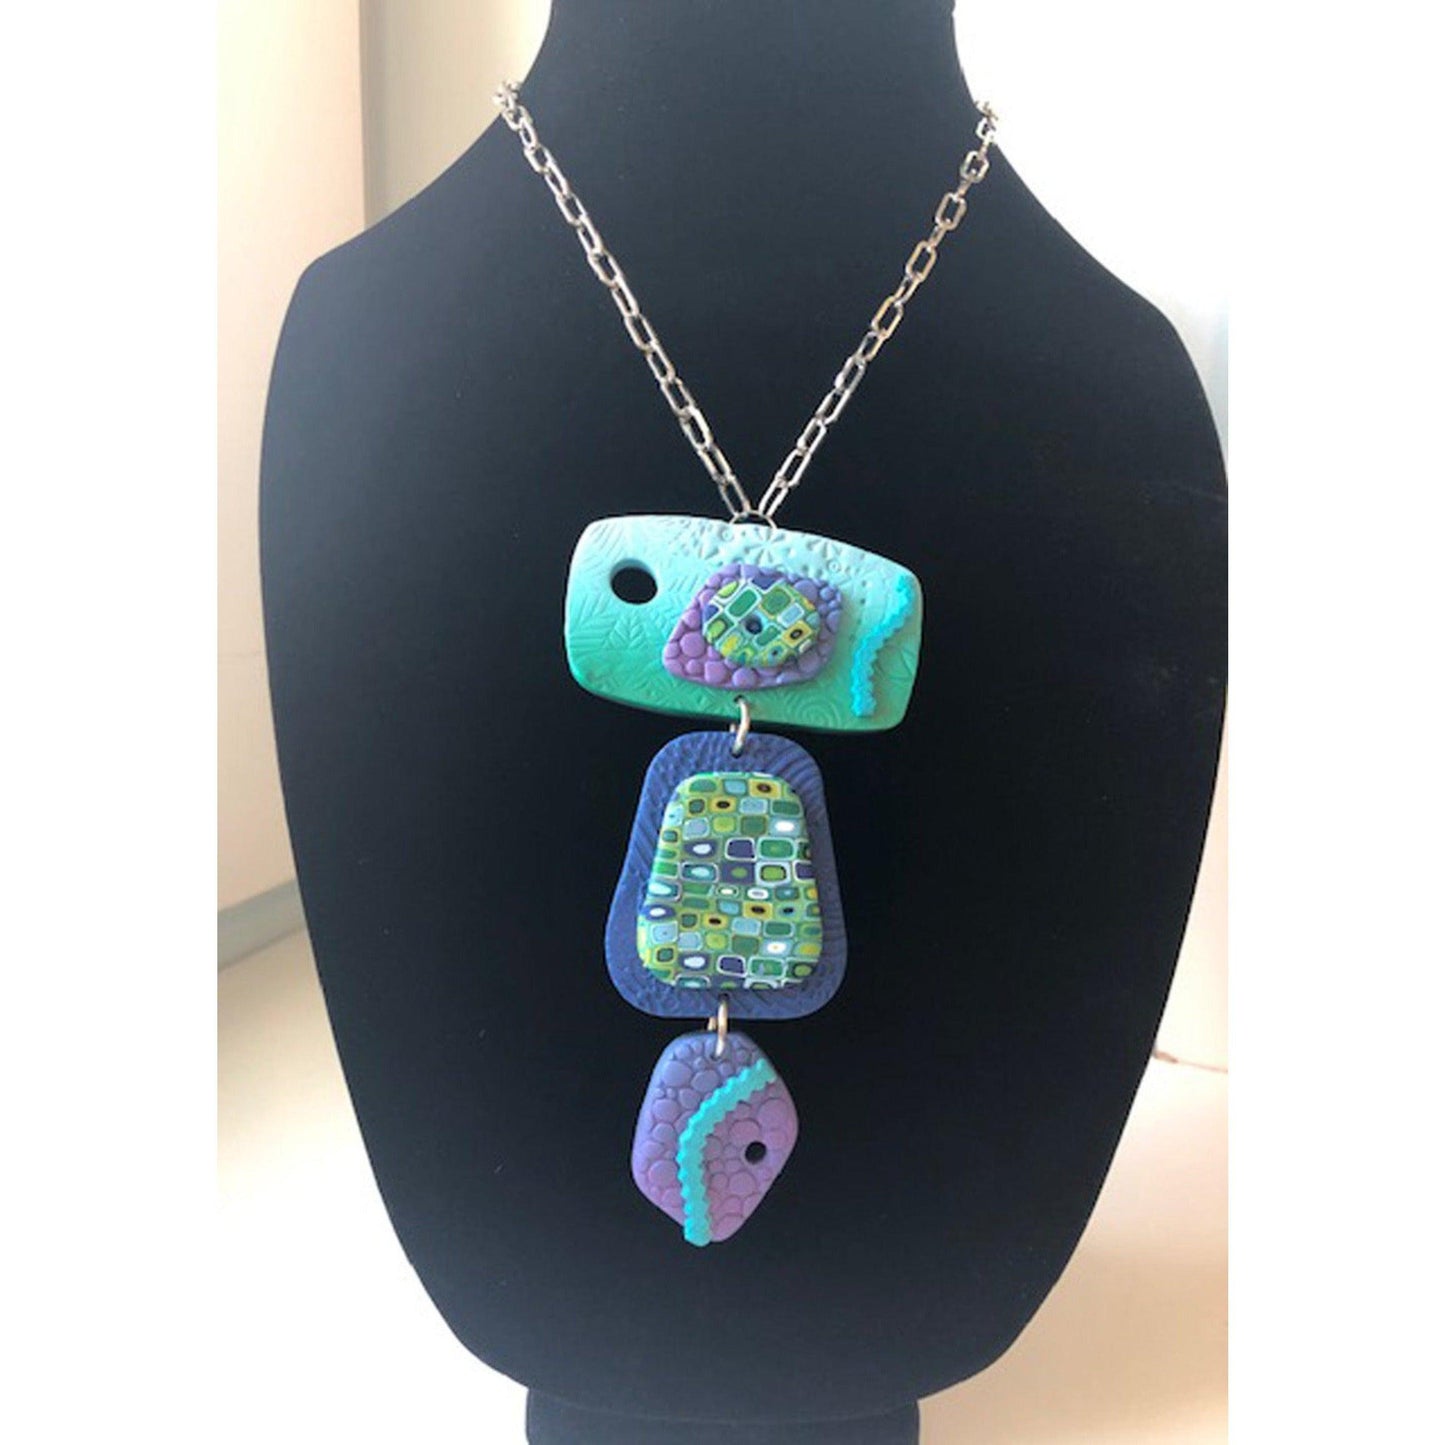 Mixed Medley Necklace - shades of blue green dot pattern - The Art of Lori Axelrod